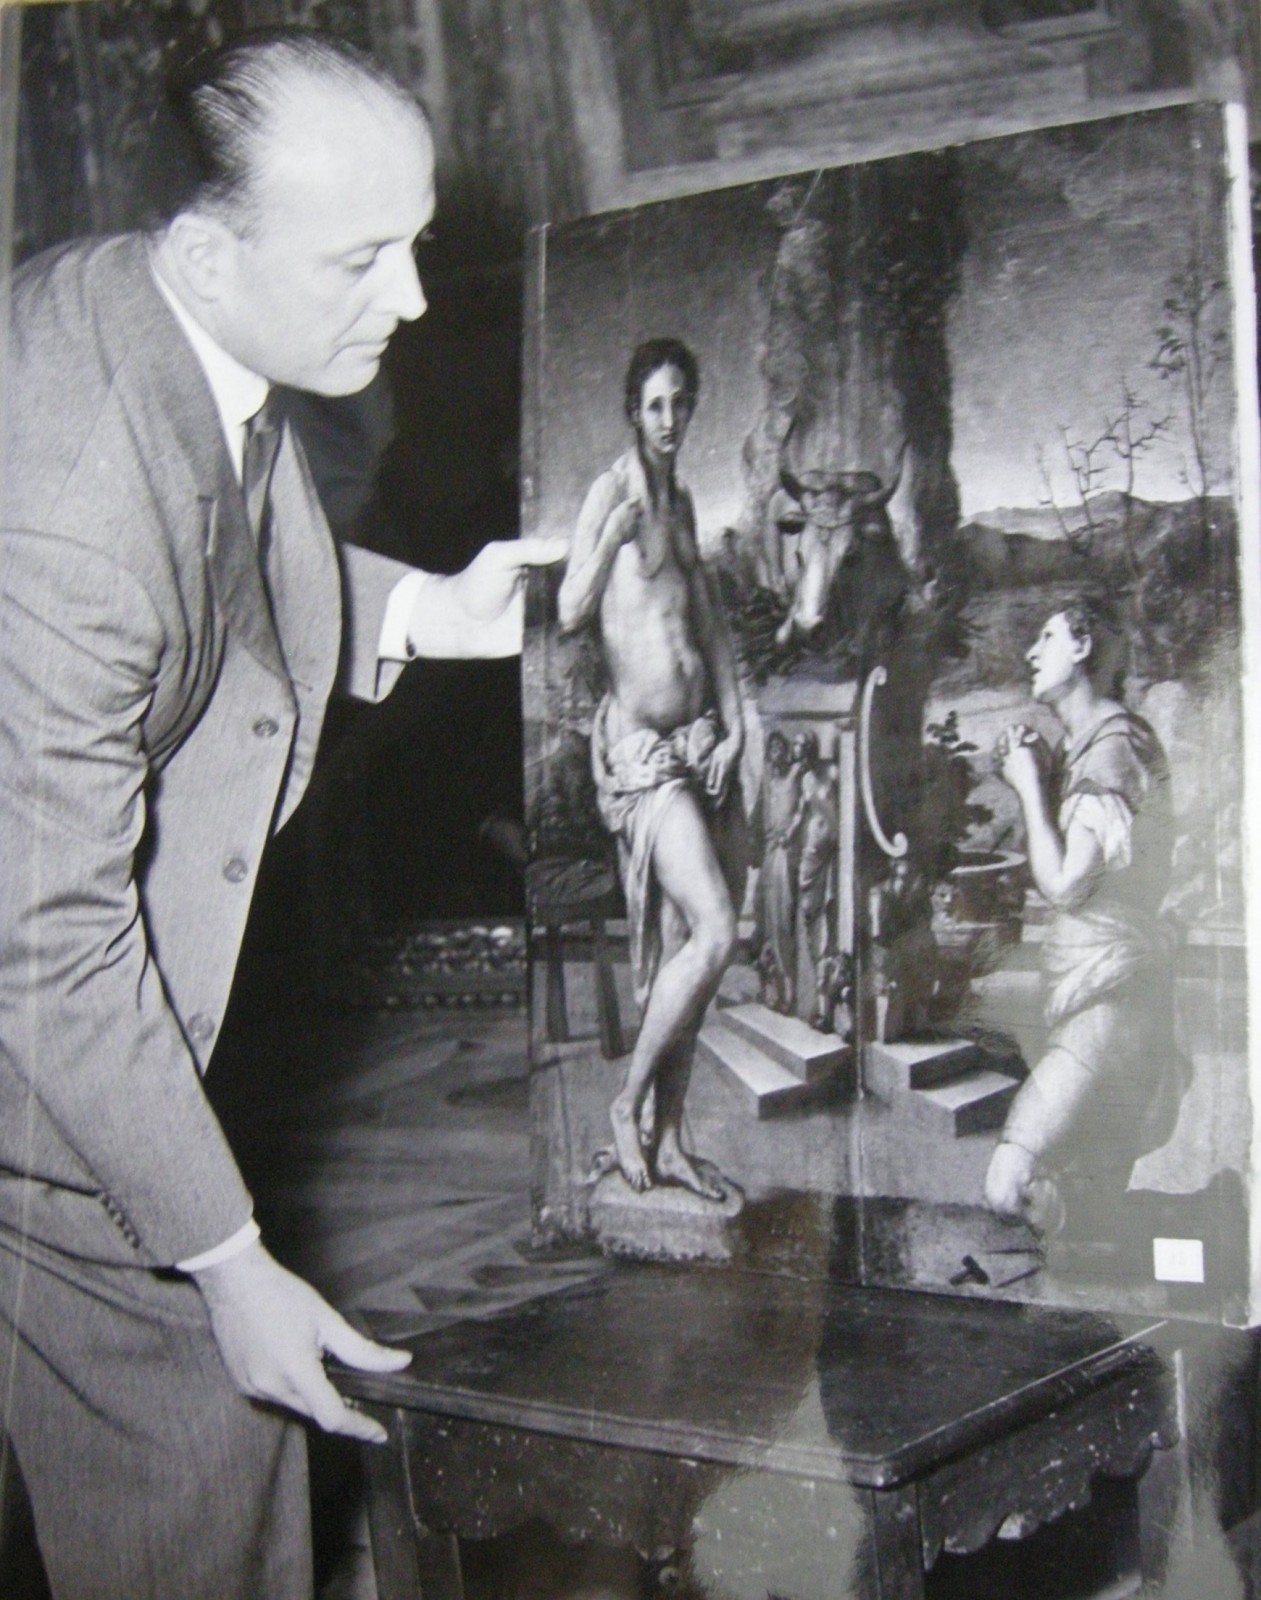 Rodolfo Siviero with a recovered work by Pontormo